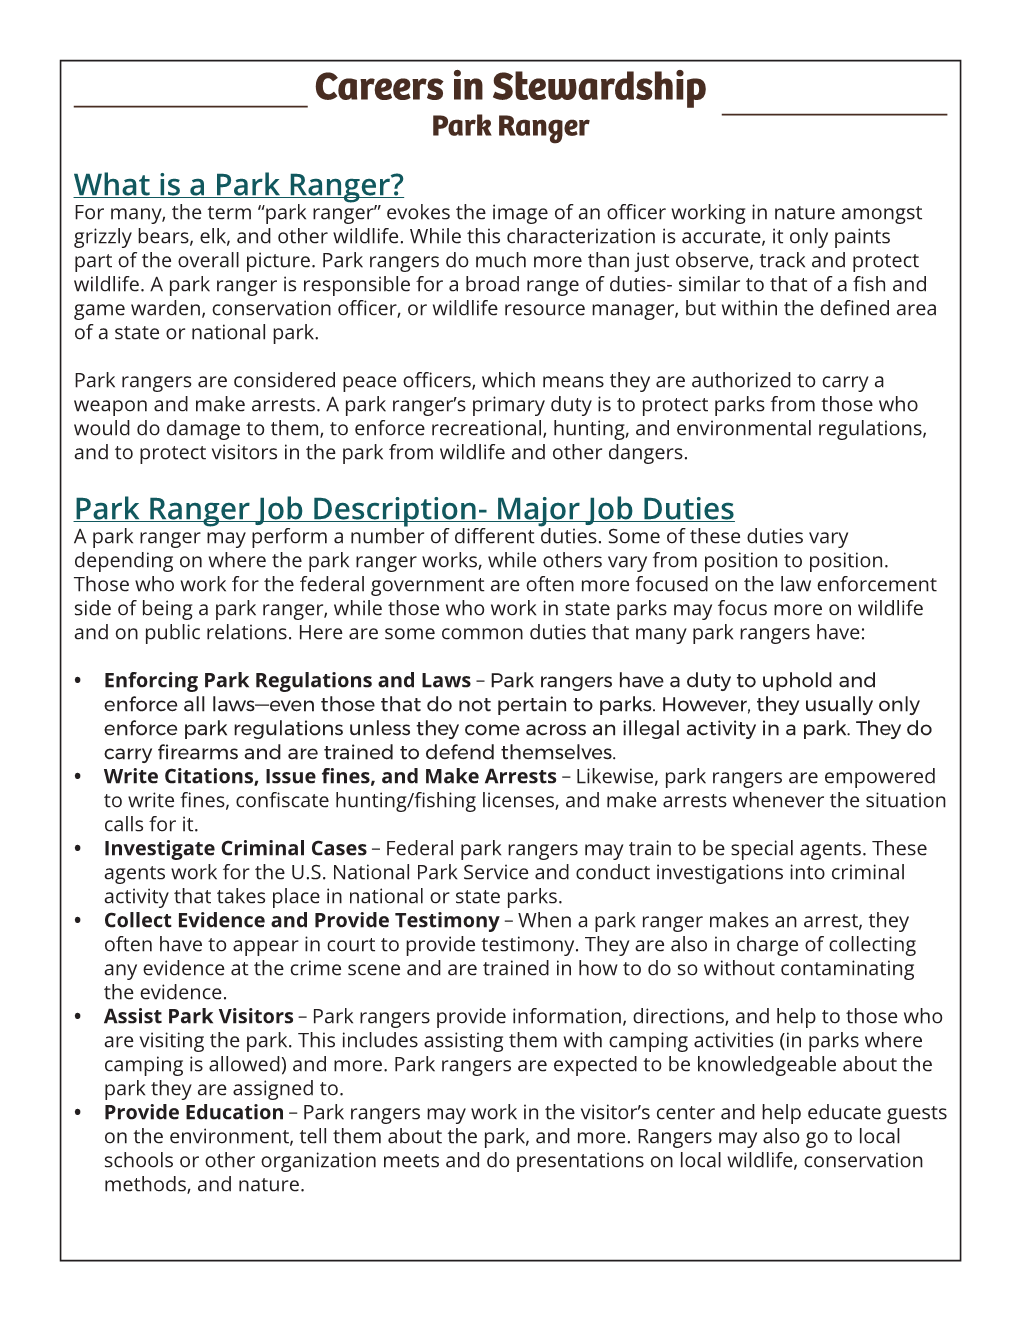 Park Ranger What Is a Park Ranger? for Many, the Term “Park Ranger” Evokes the Image of an Officer Working in Nature Amongst Grizzly Bears, Elk, and Other Wildlife